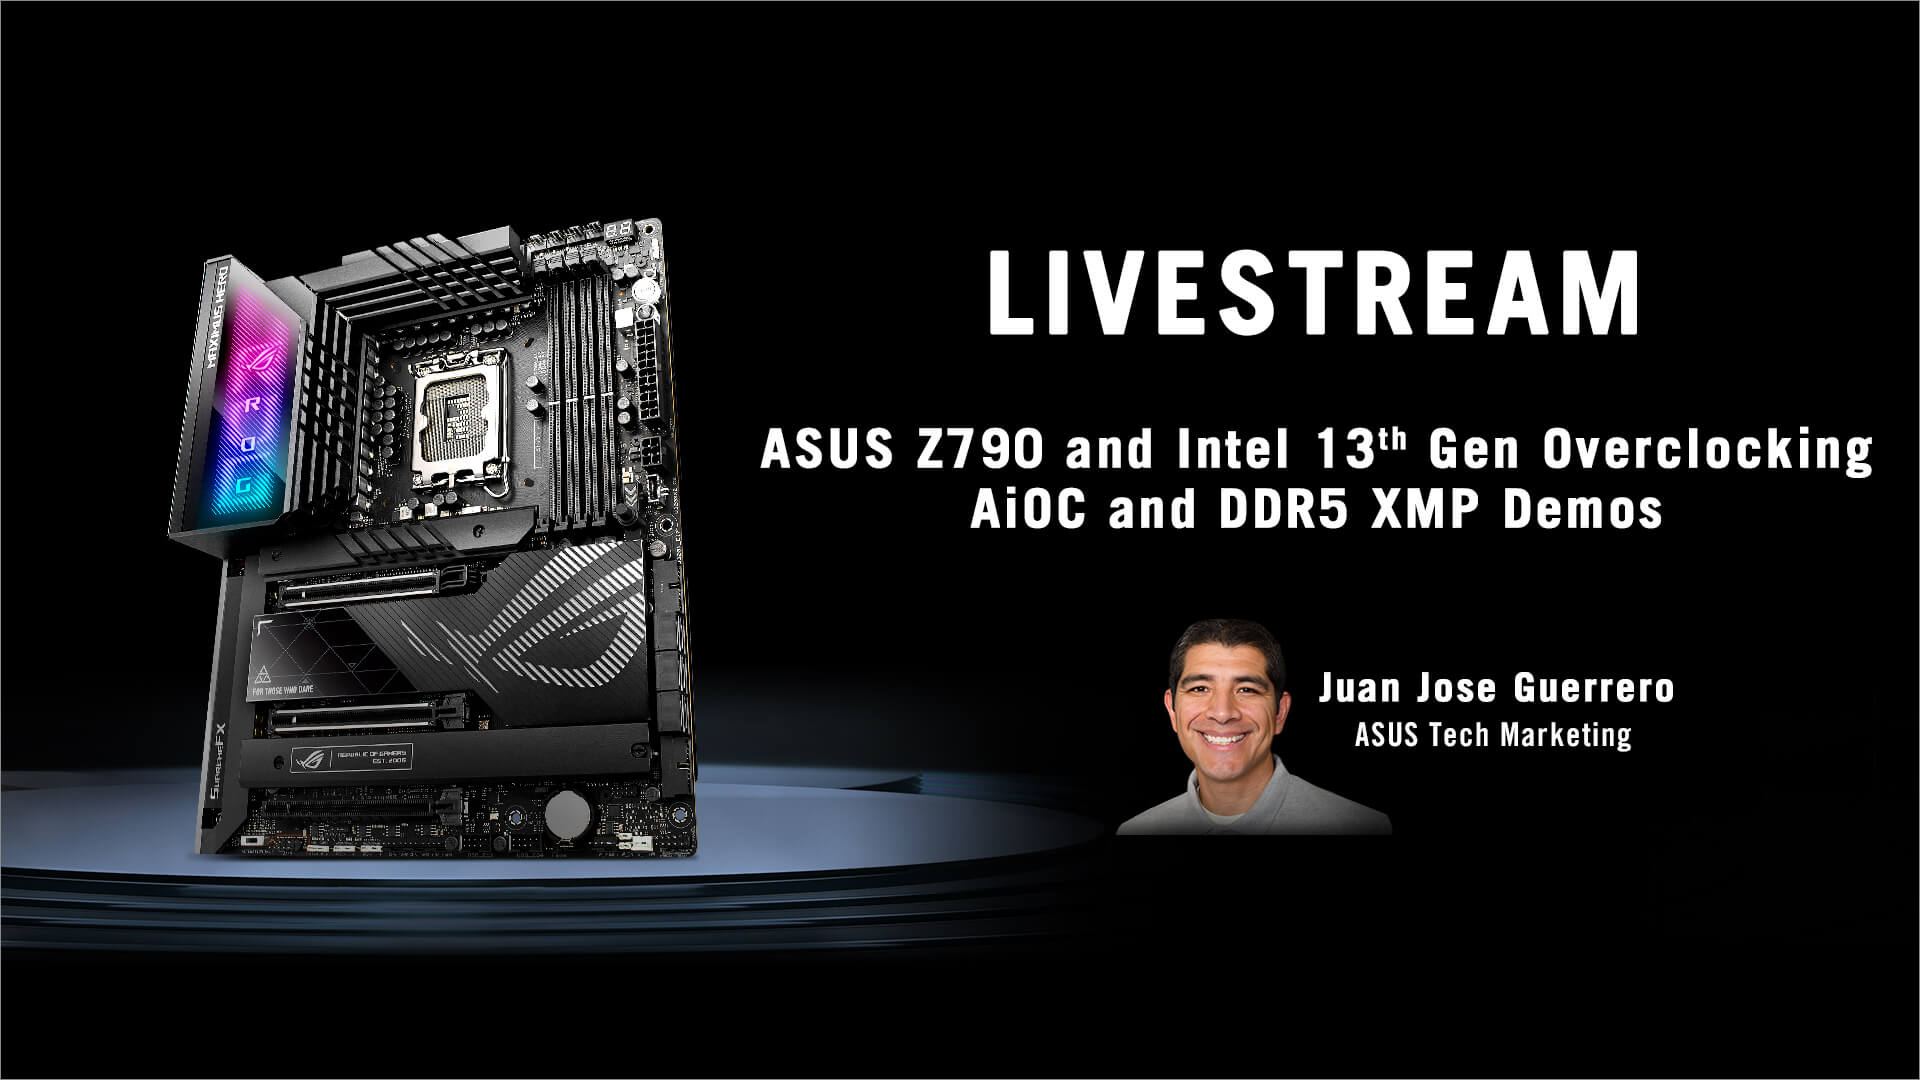 Image with livestream info and the portrait of ASUS Technical Marketing Juan Jose Guerrero